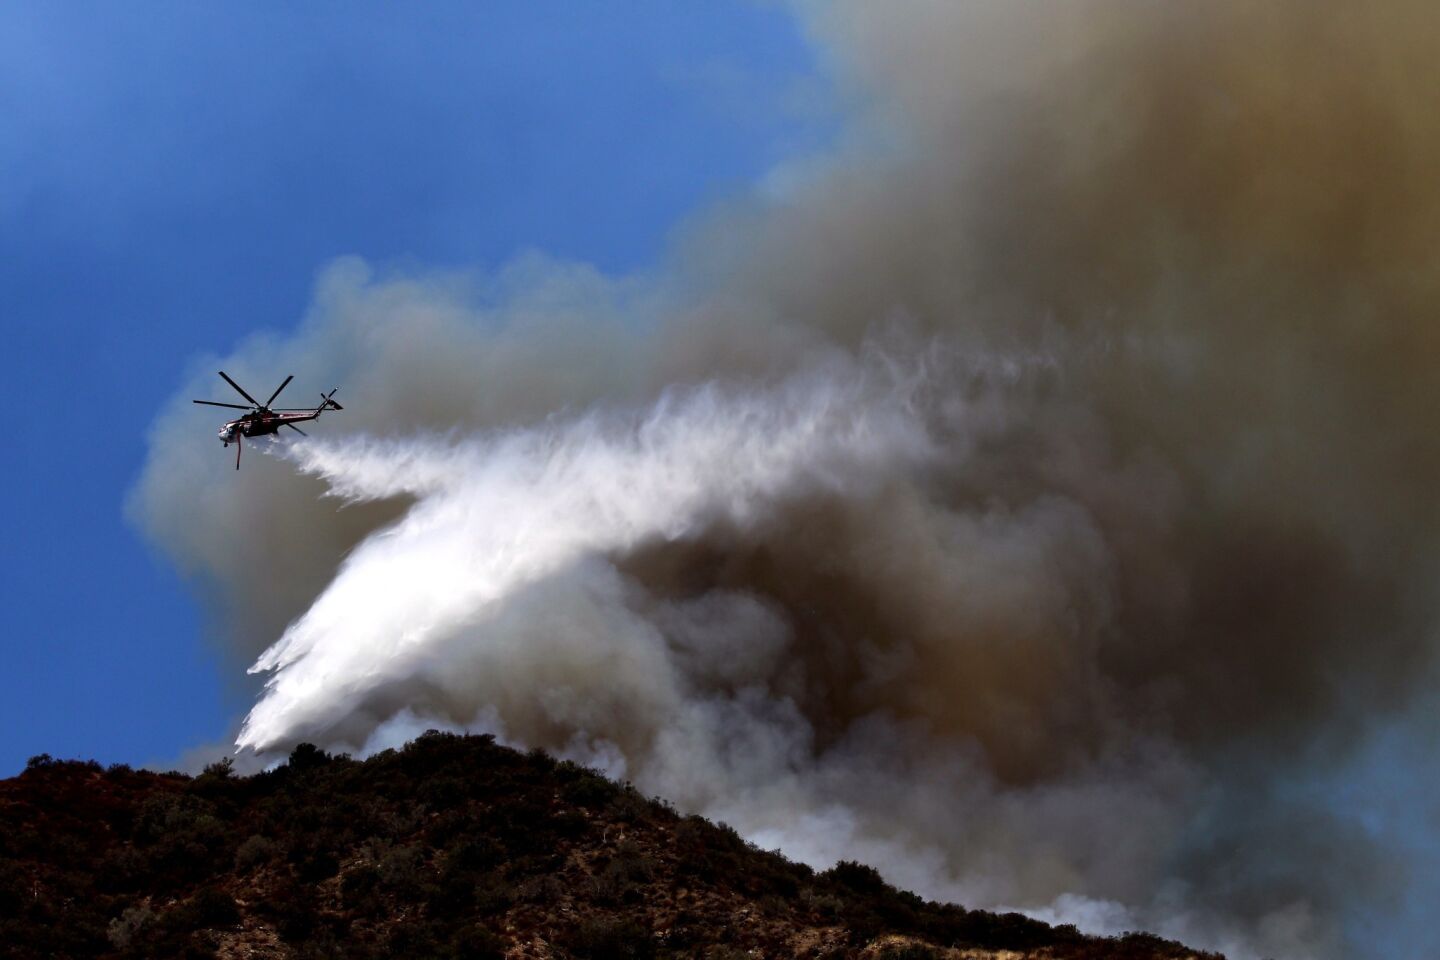 An Orange County Fire helicopter makes a water drop on a brush fire in Silverado Canyon.